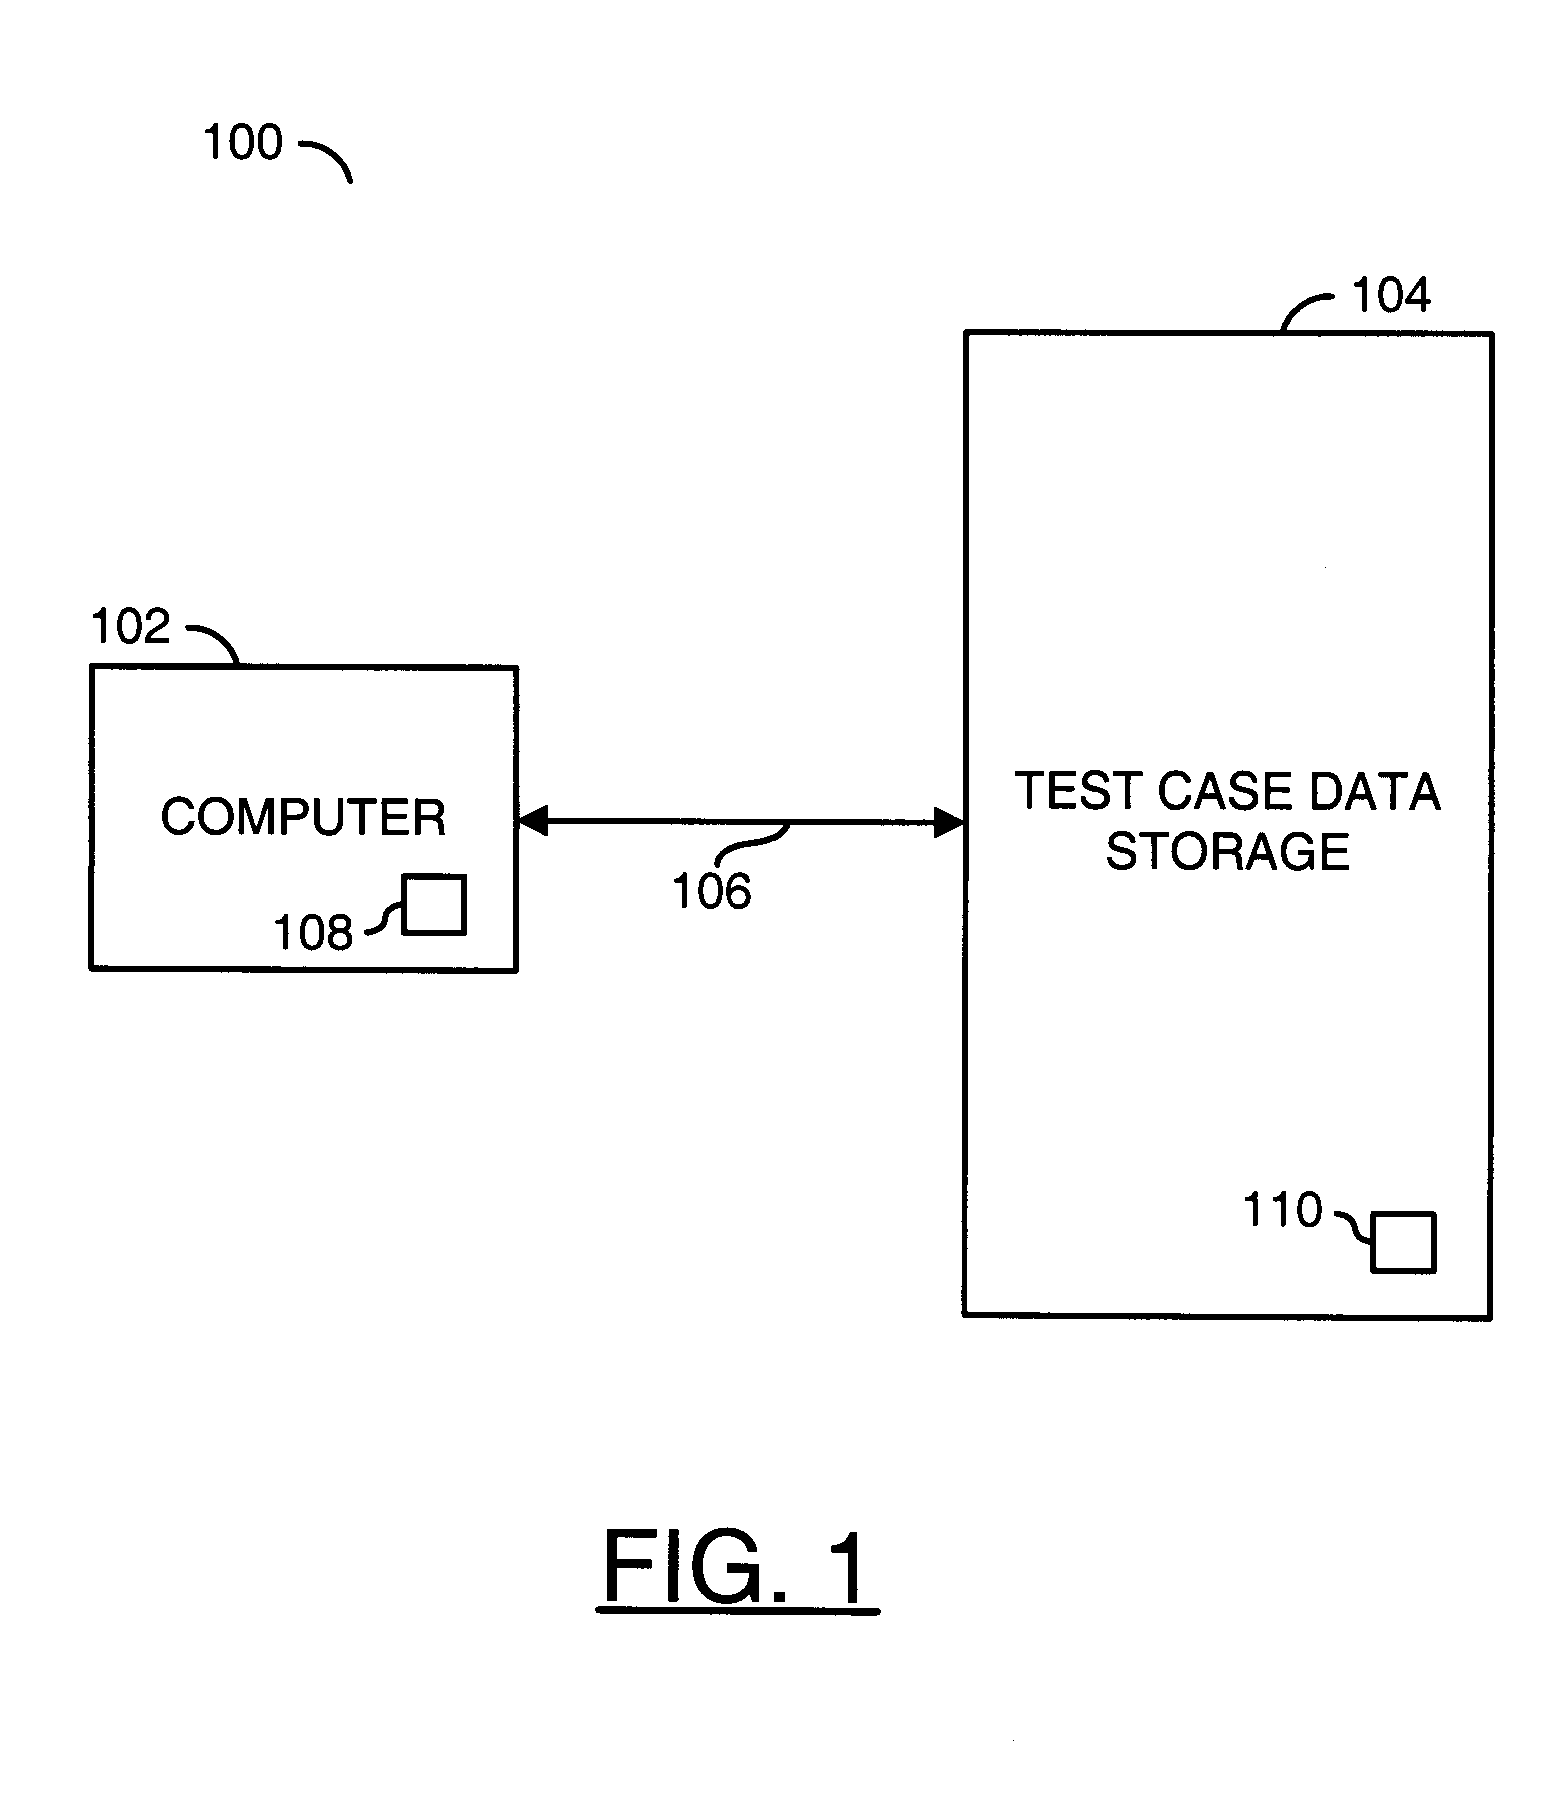 Method for determining which of a number of test cases should be run during testing